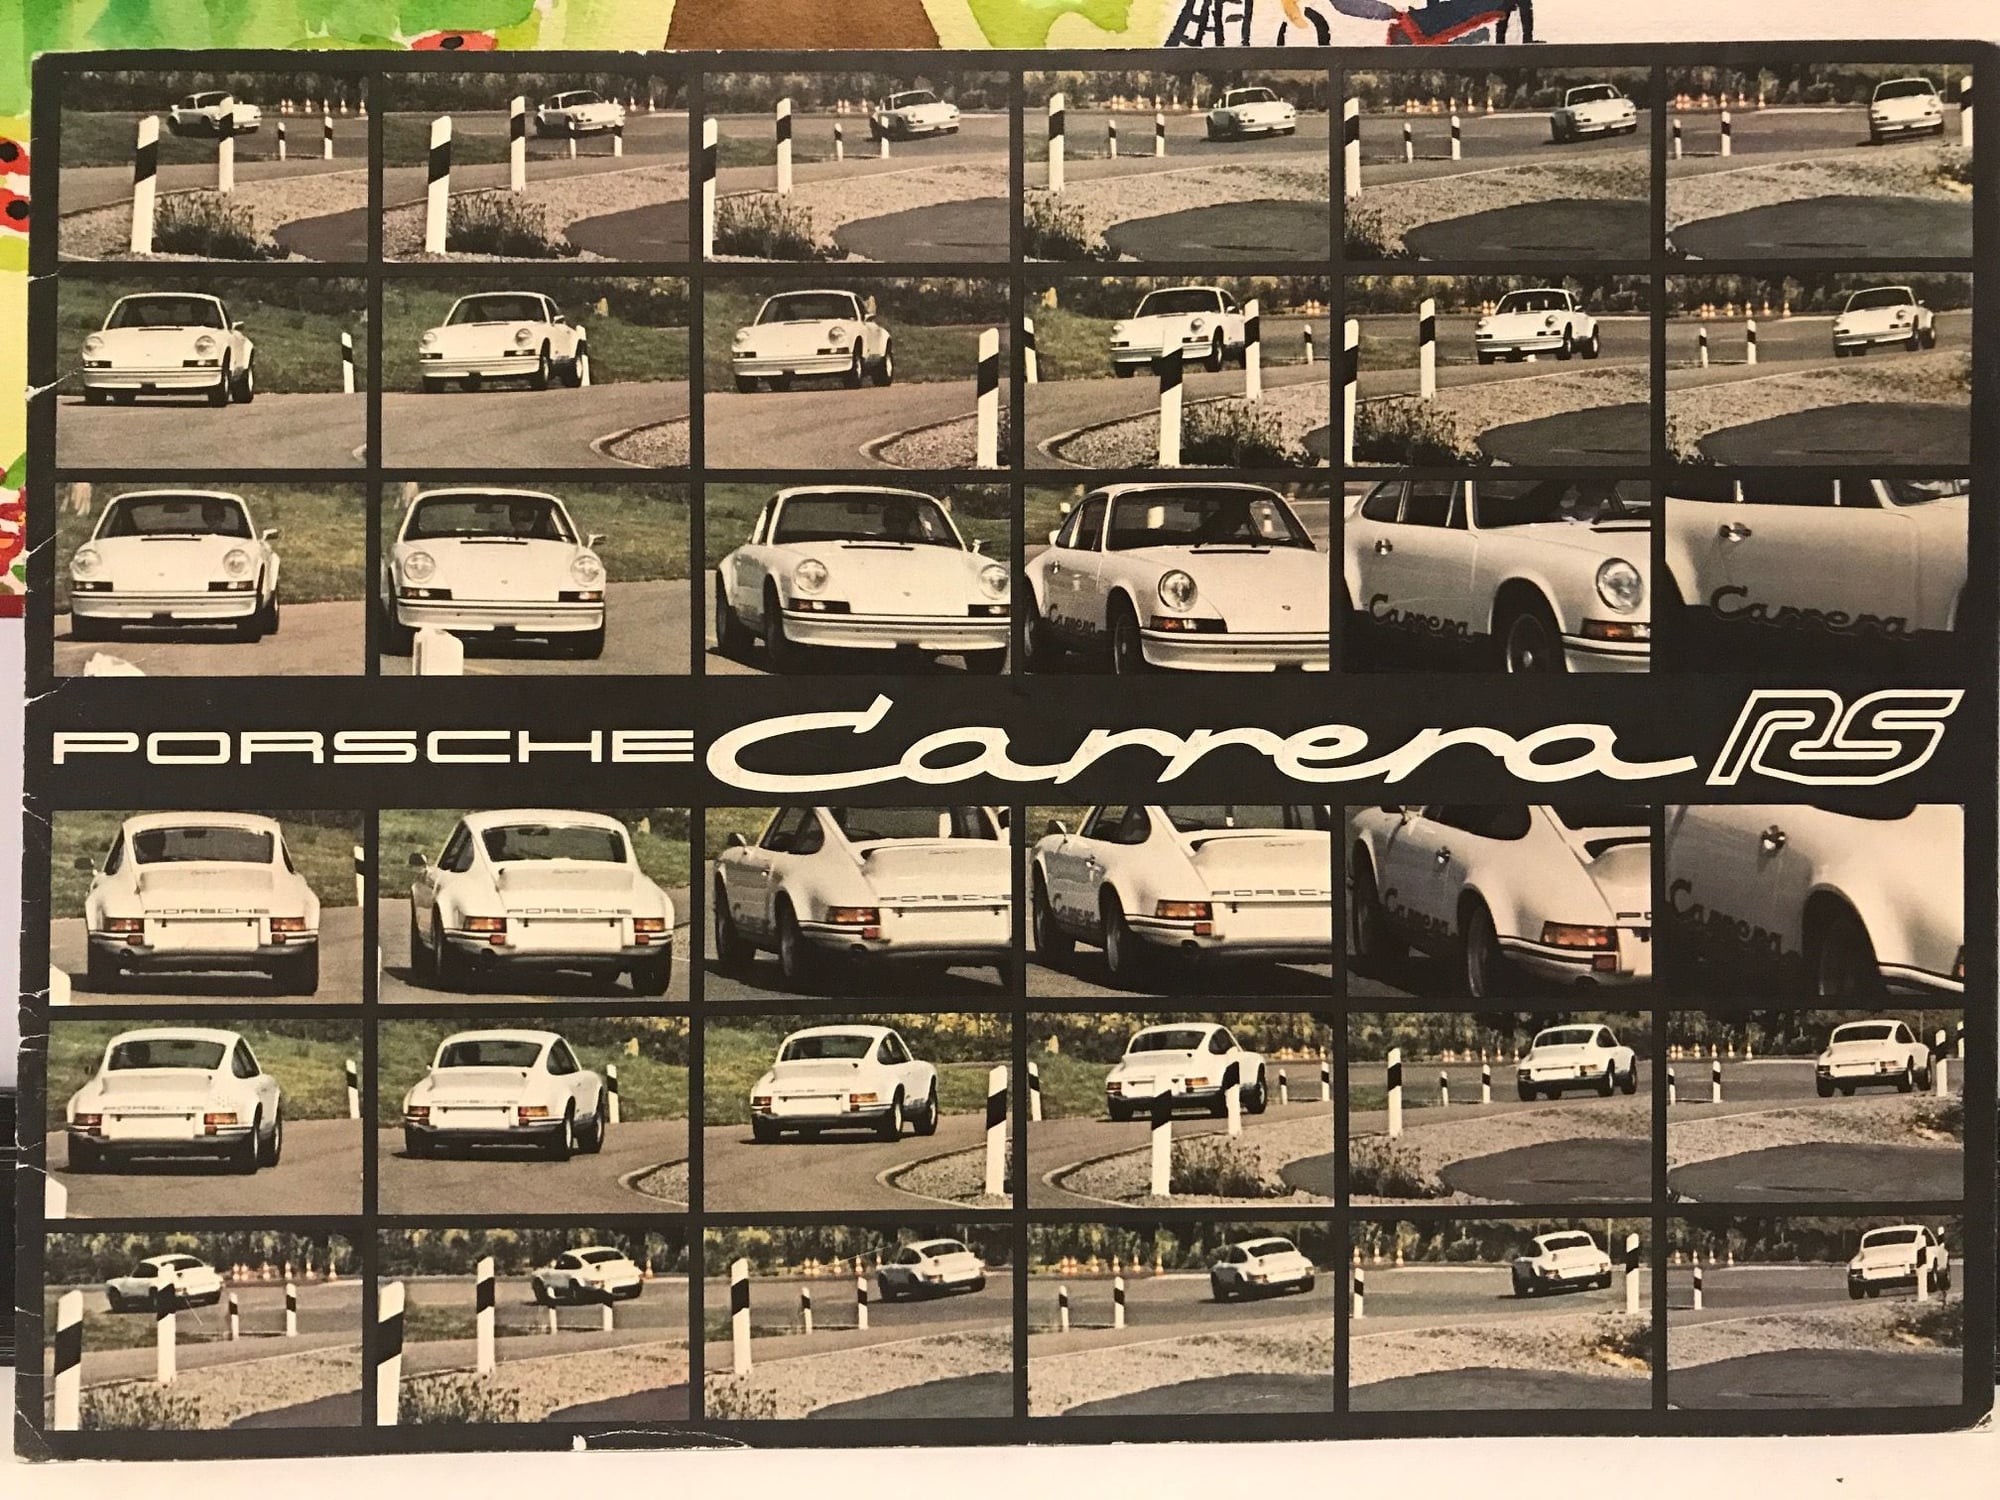 Miscellaneous - 1973 Carrera RS Brochure-German Text - Used - 1973 to 1974 Porsche 911 - Hickory, NC 28601, United States